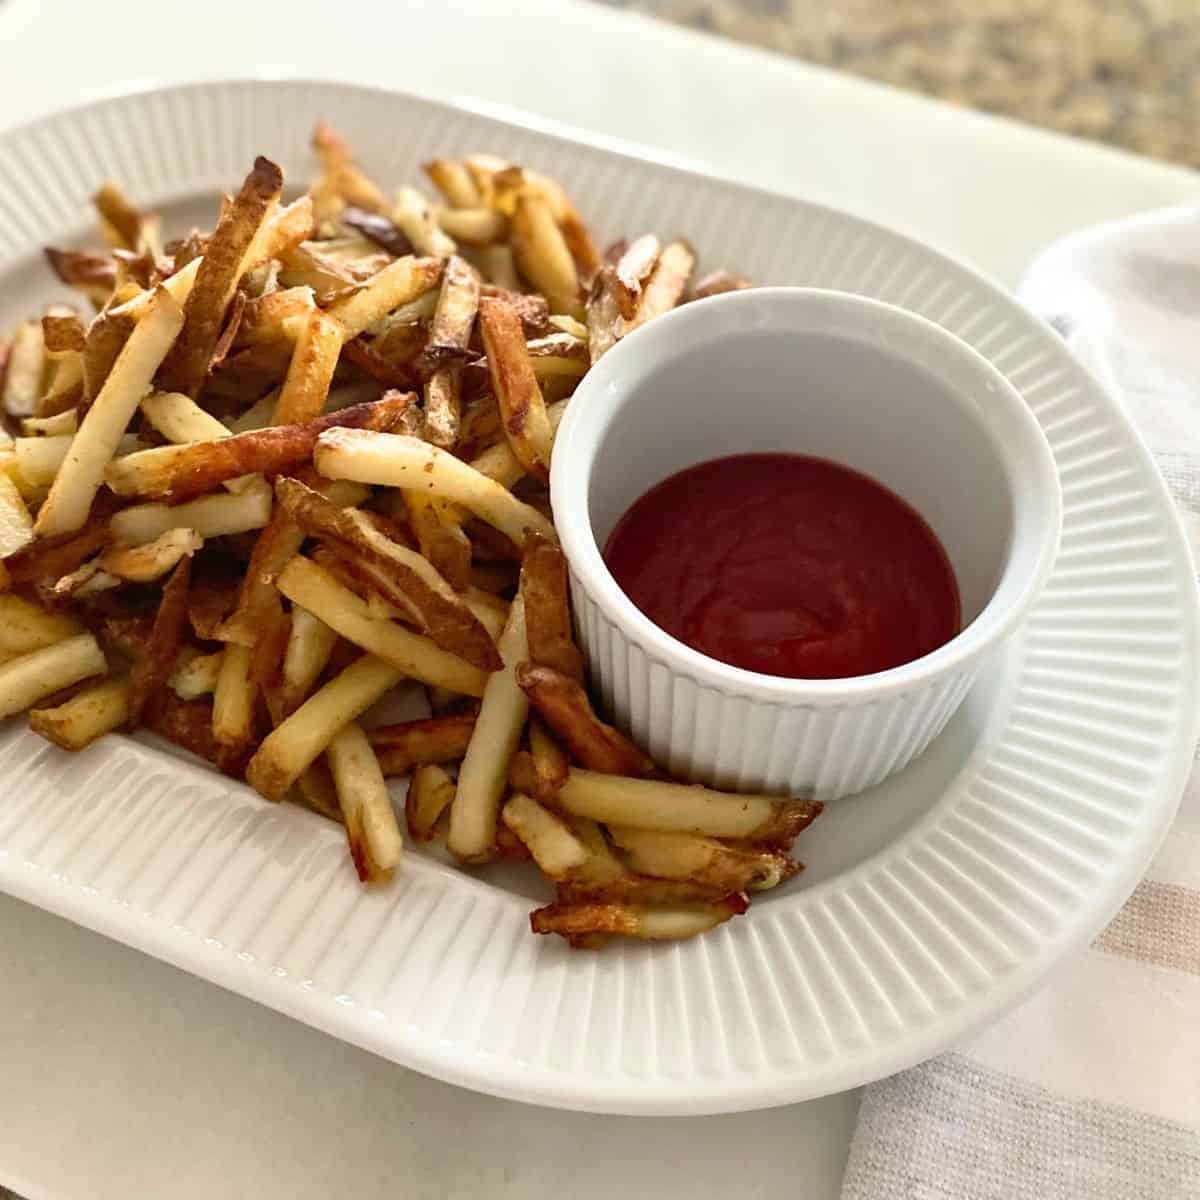 Homemade French fries on a platter with ketchup